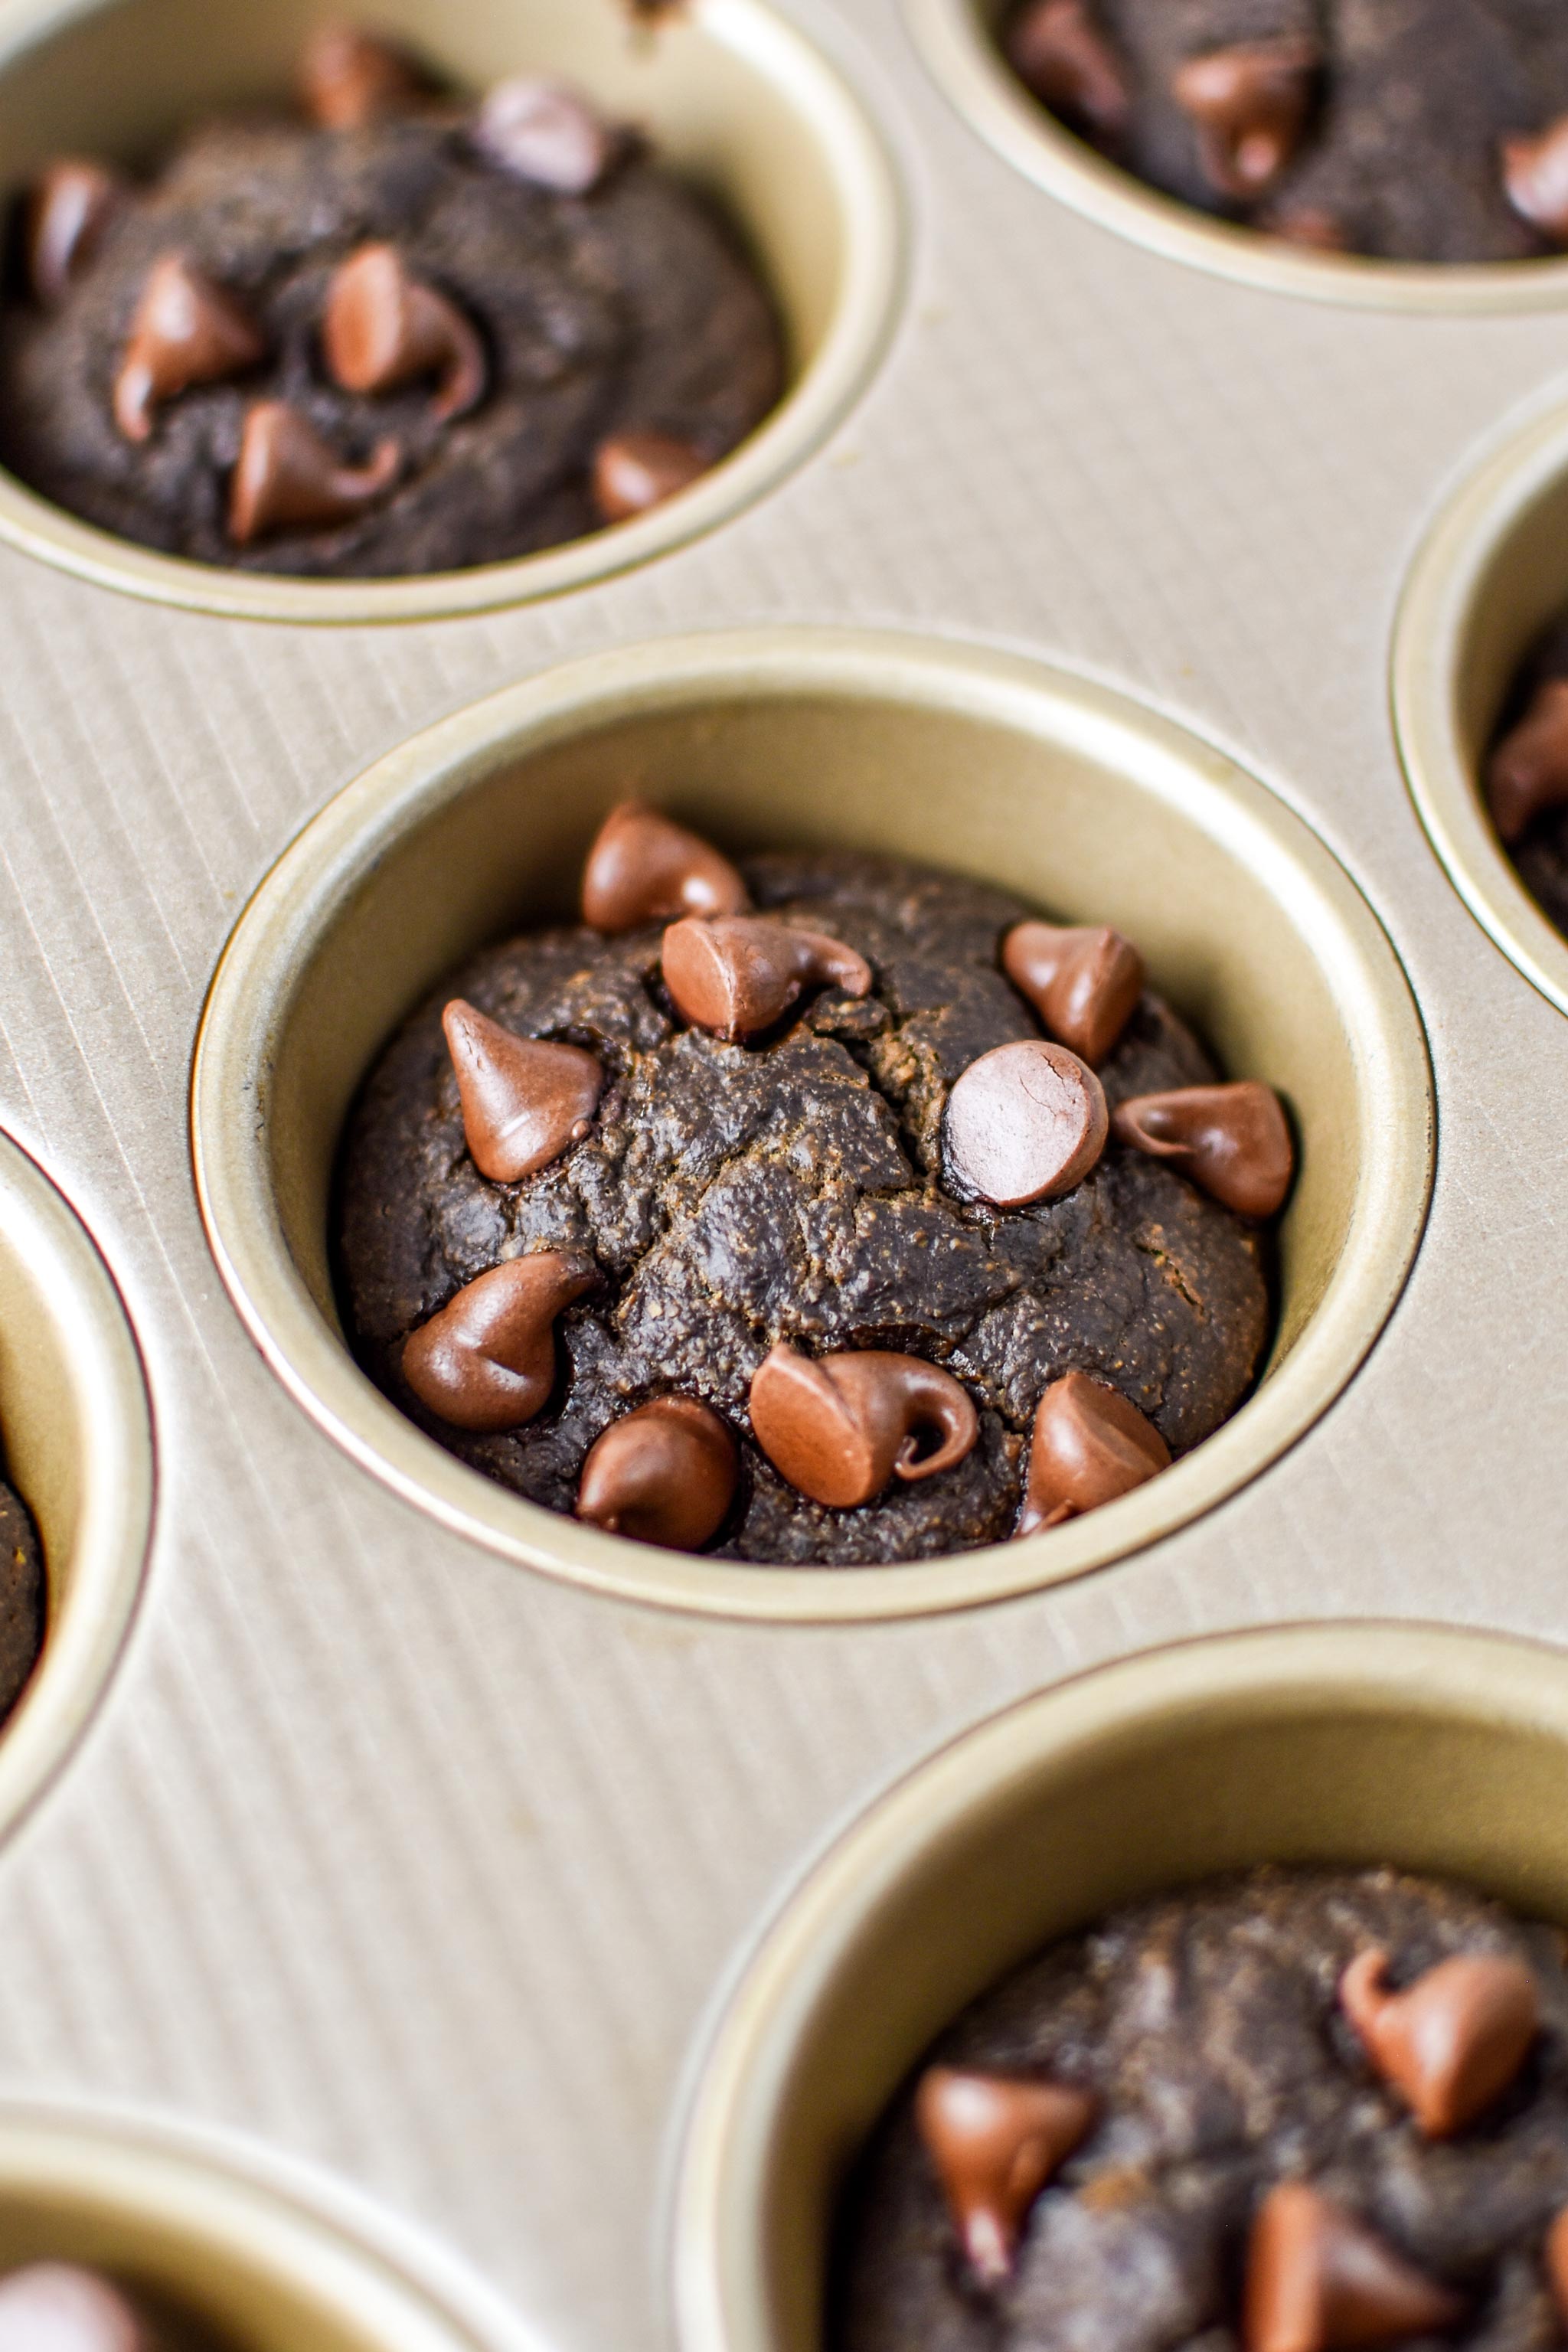 baked chocolate spinach blender muffins